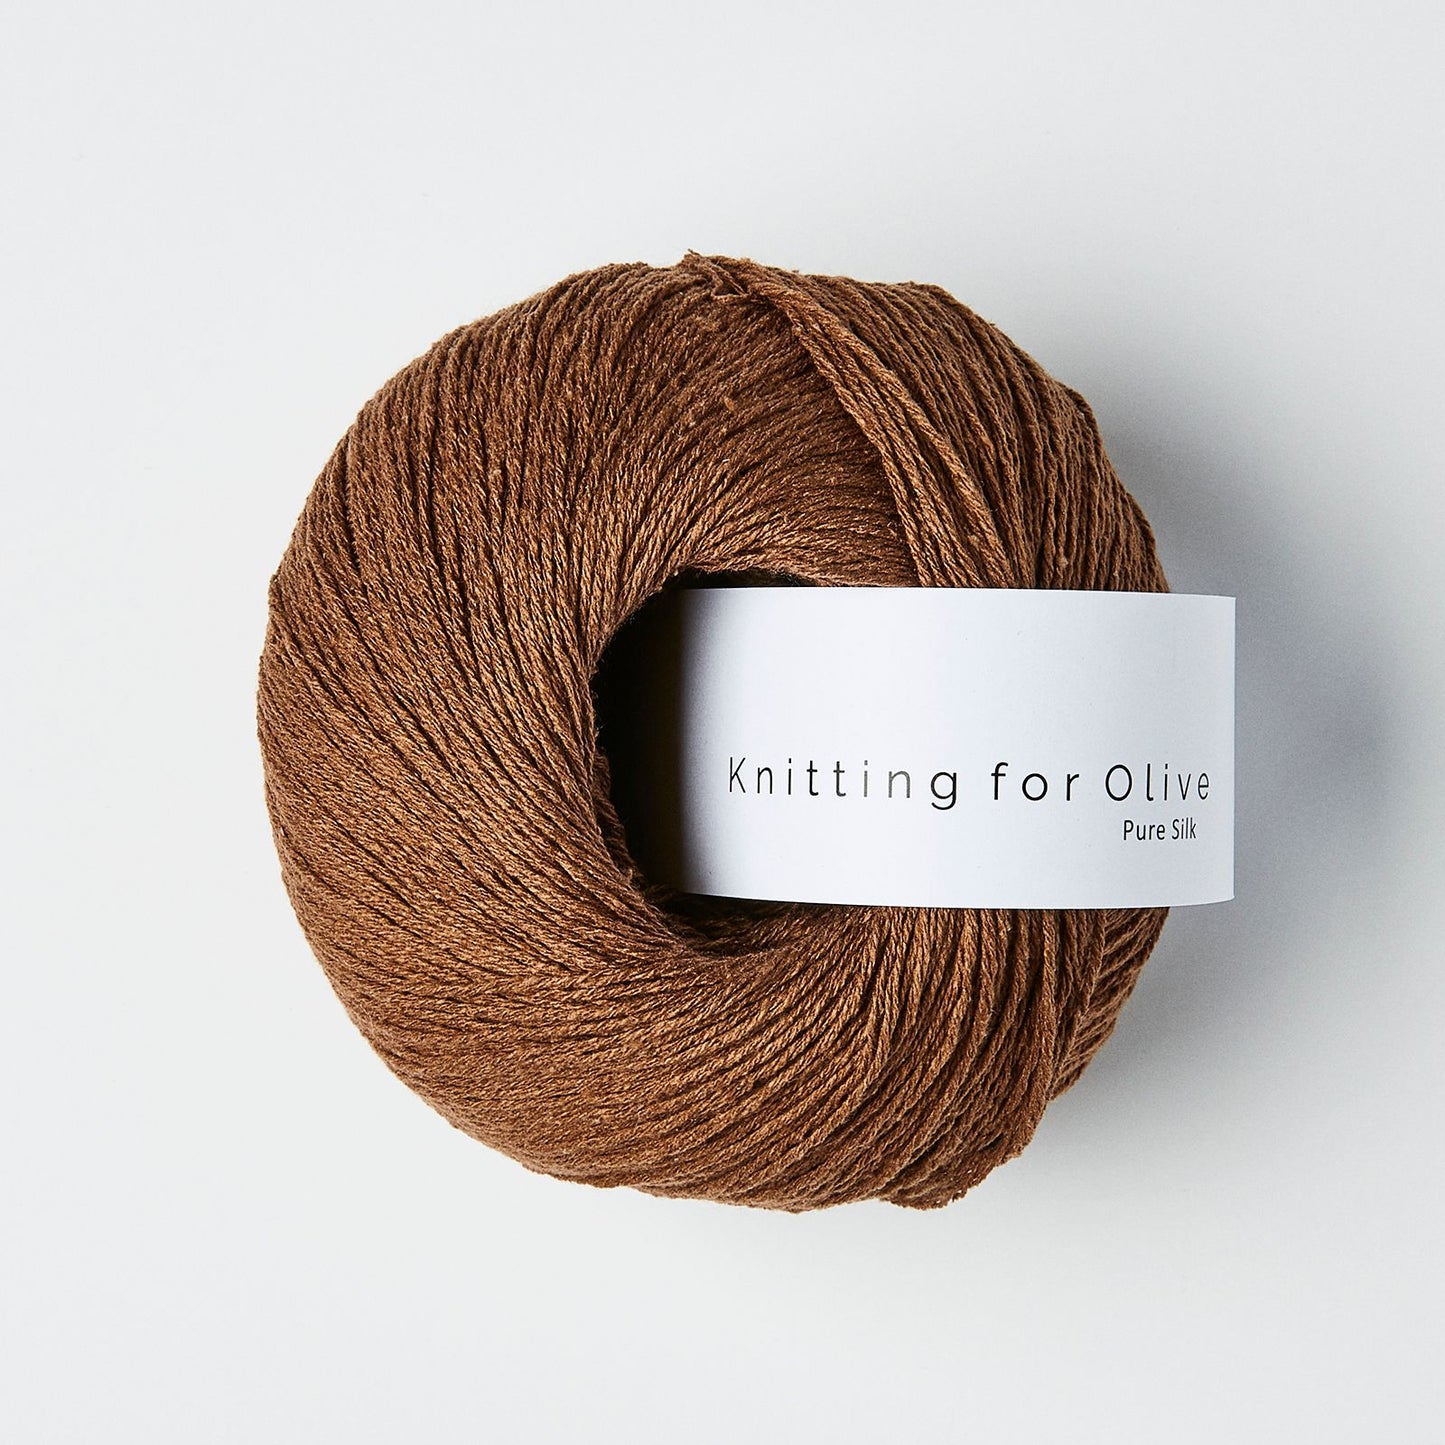 Knitting for Olive Pure Silk - 50g